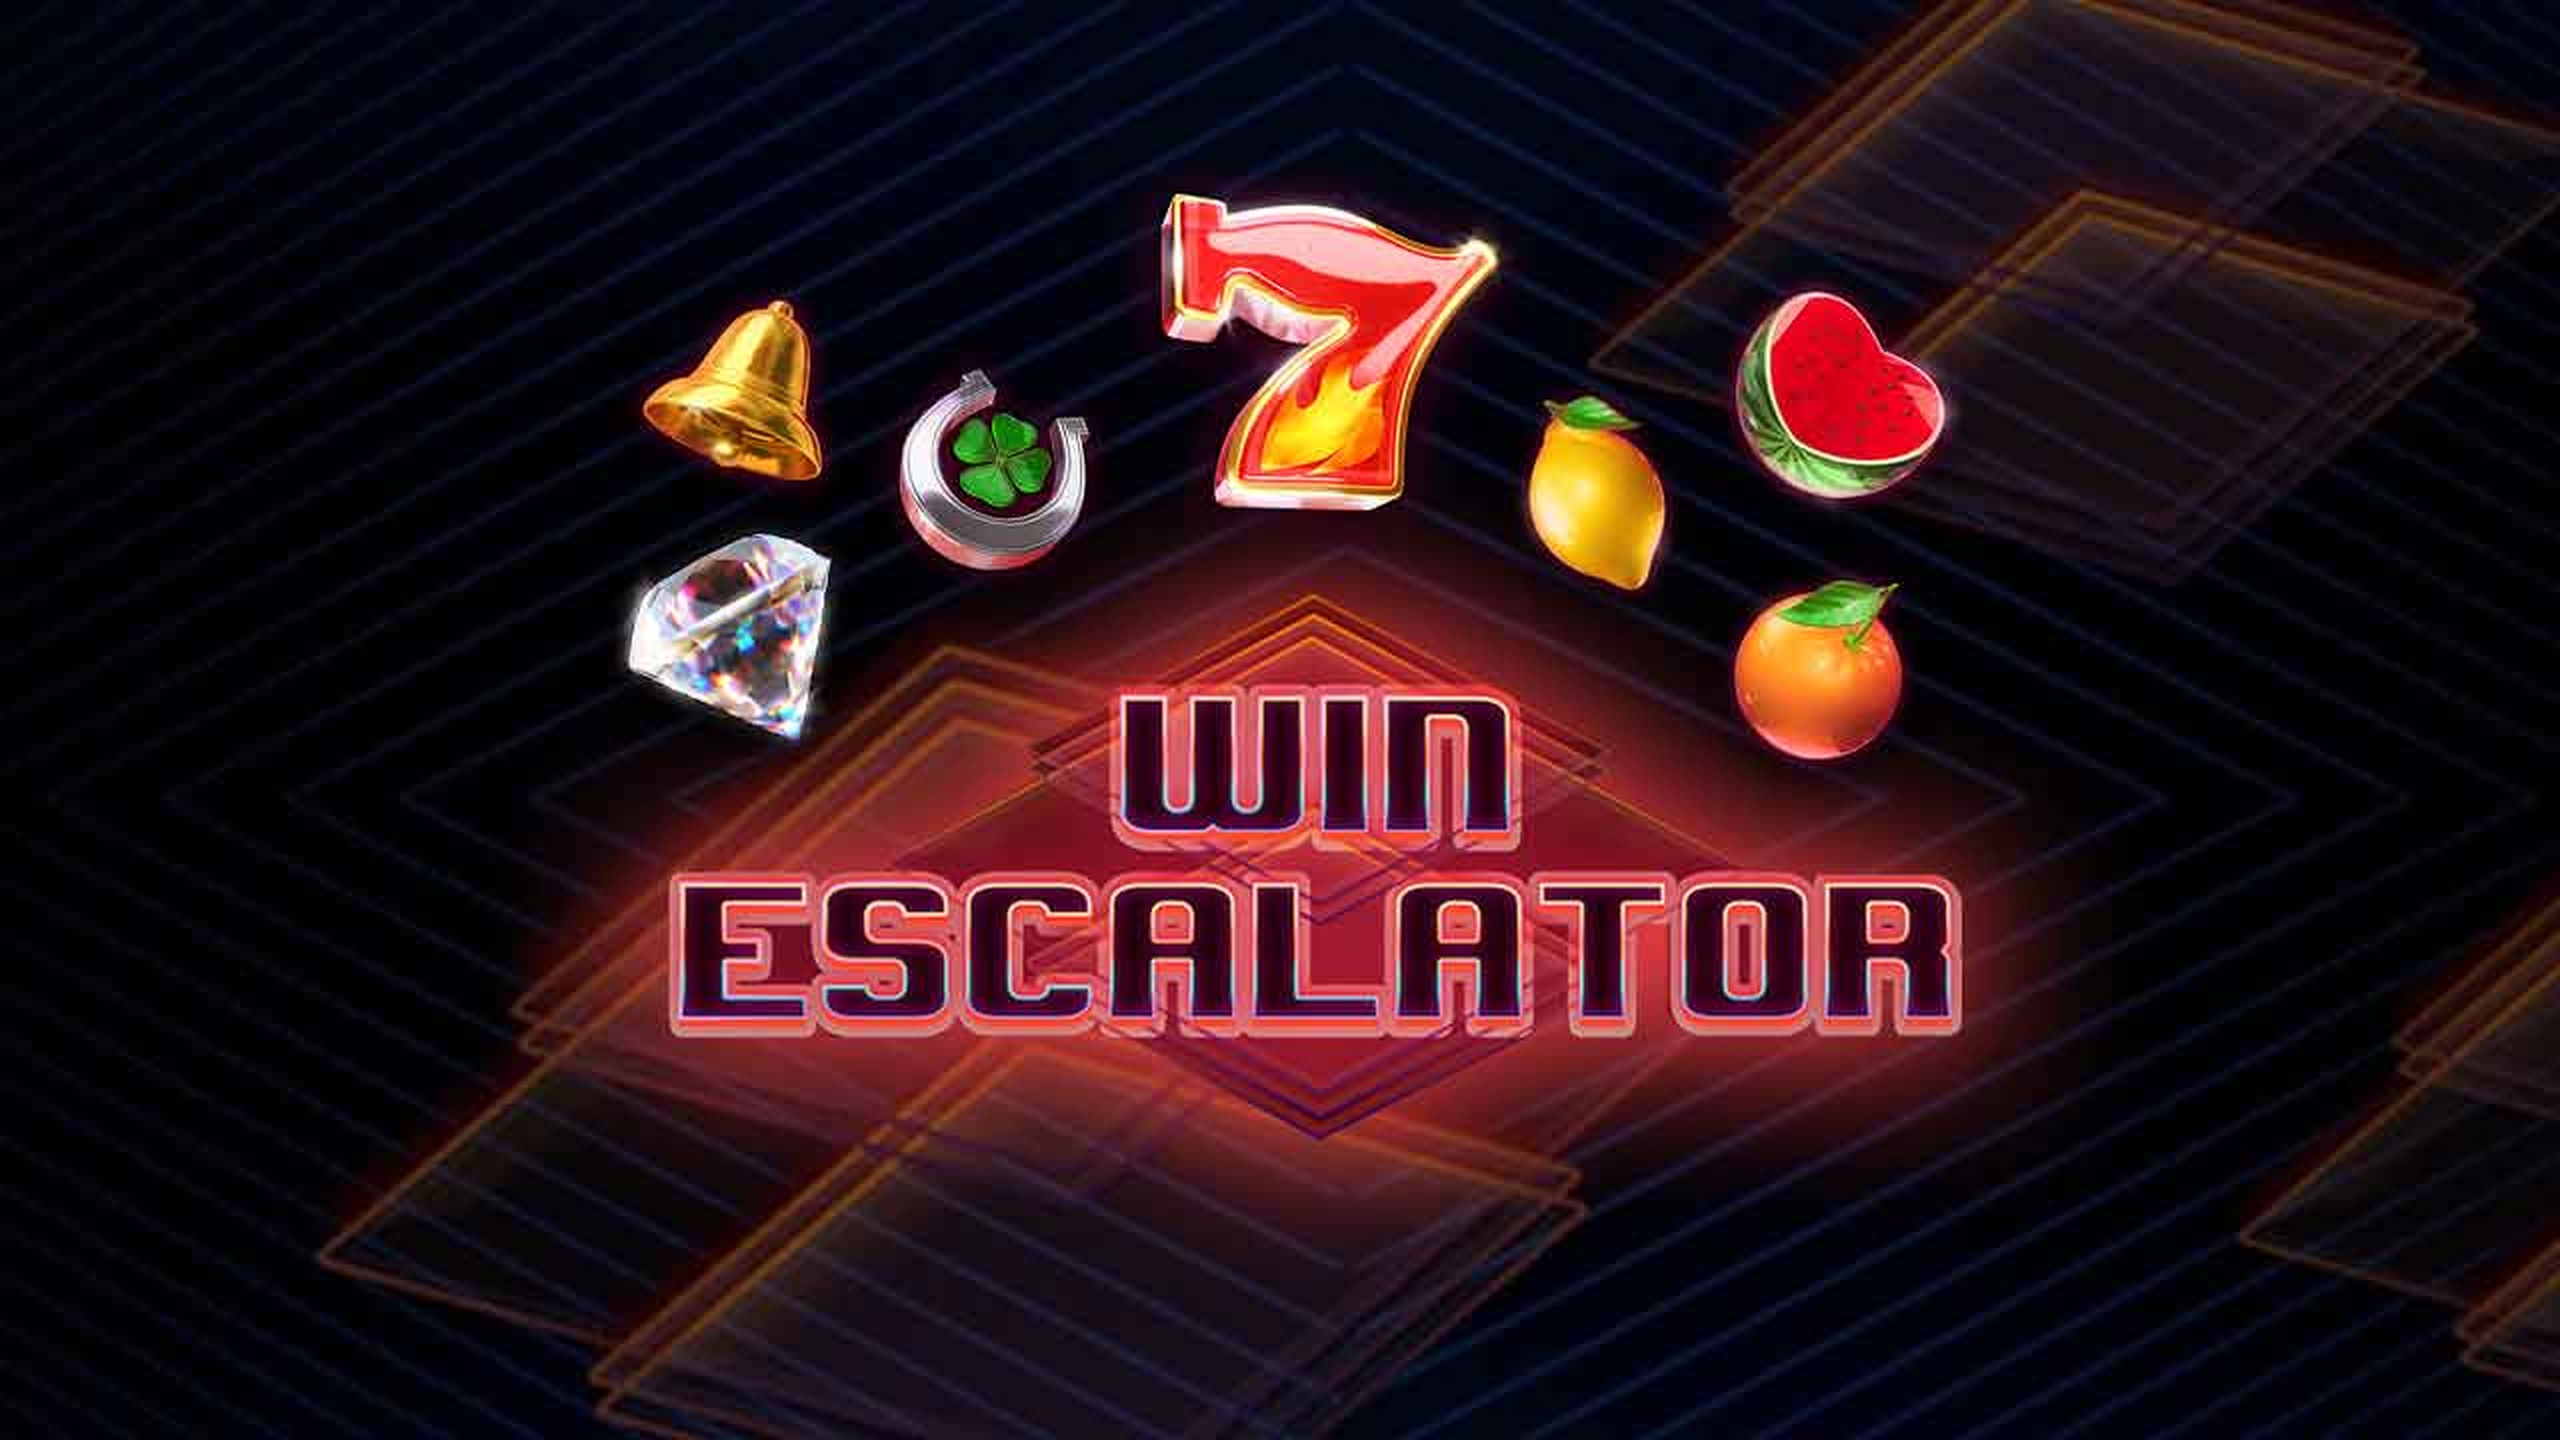 The Win Escalator Online Slot Demo Game by Red Tiger Gaming